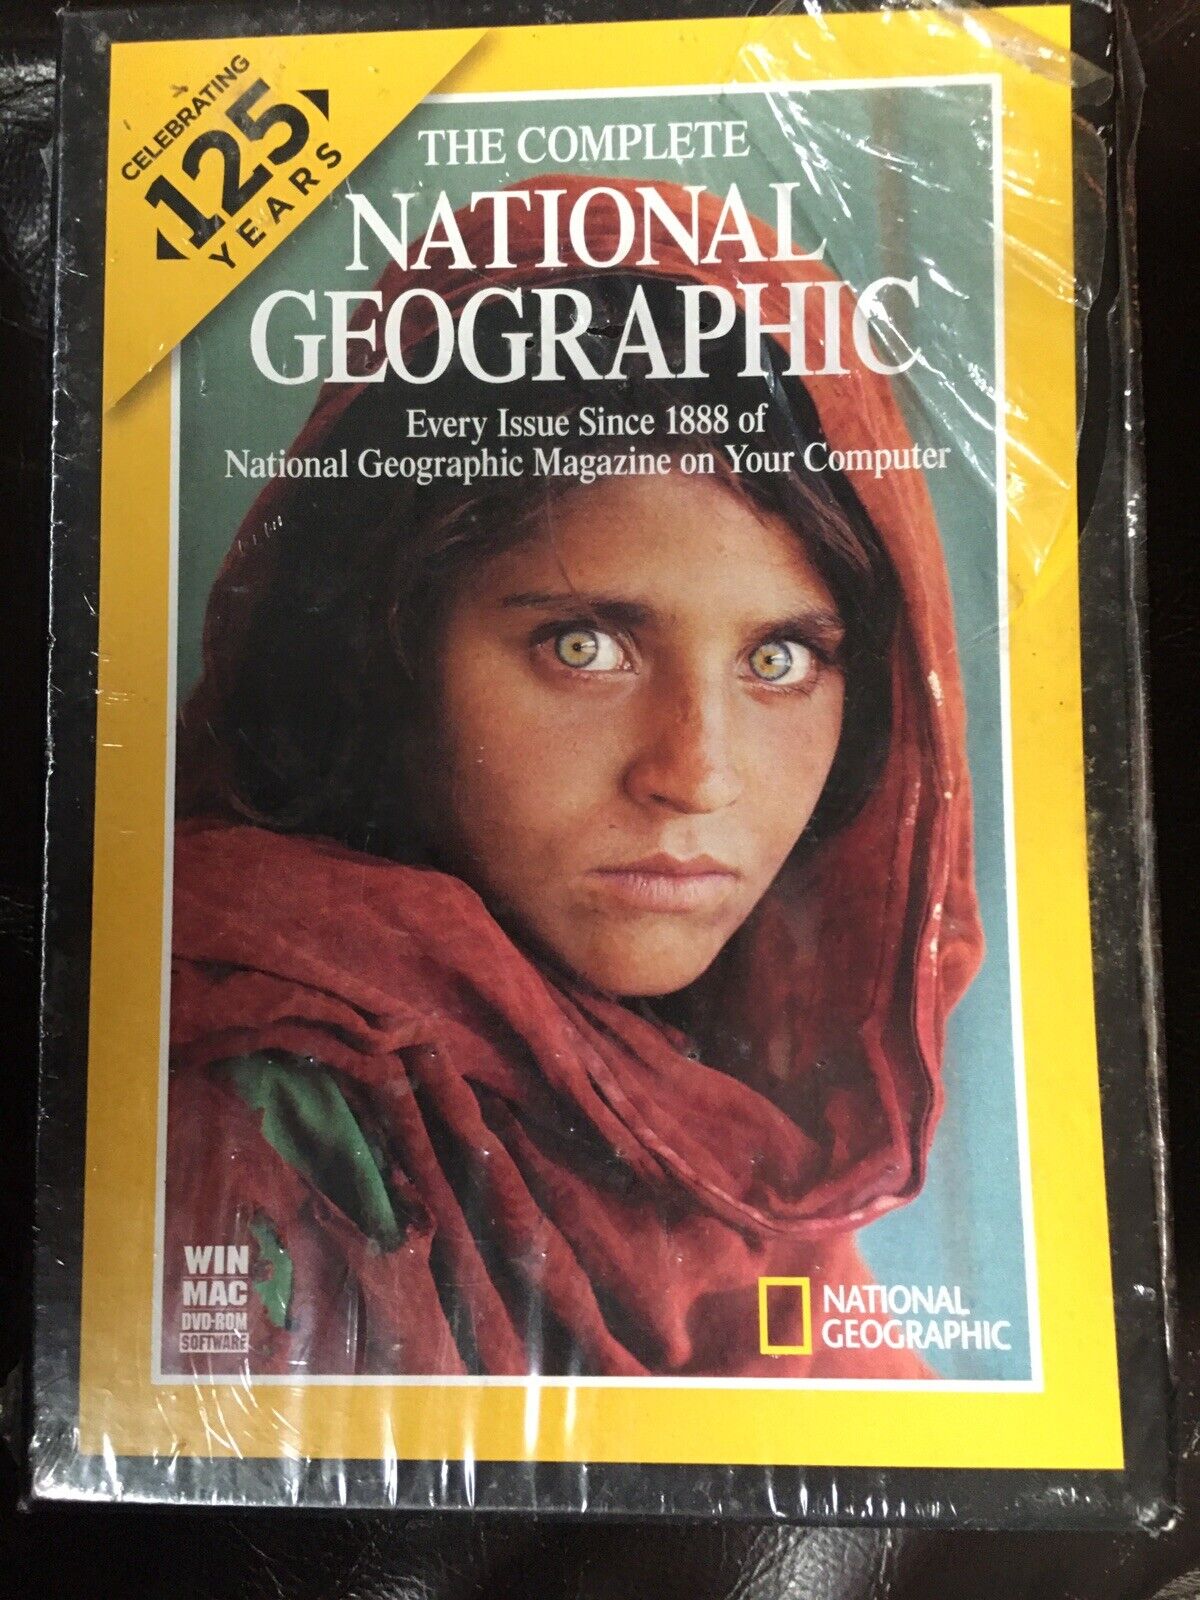 Complete National Geographic DVD Windows PC & Mac Every Issue Since 1888.